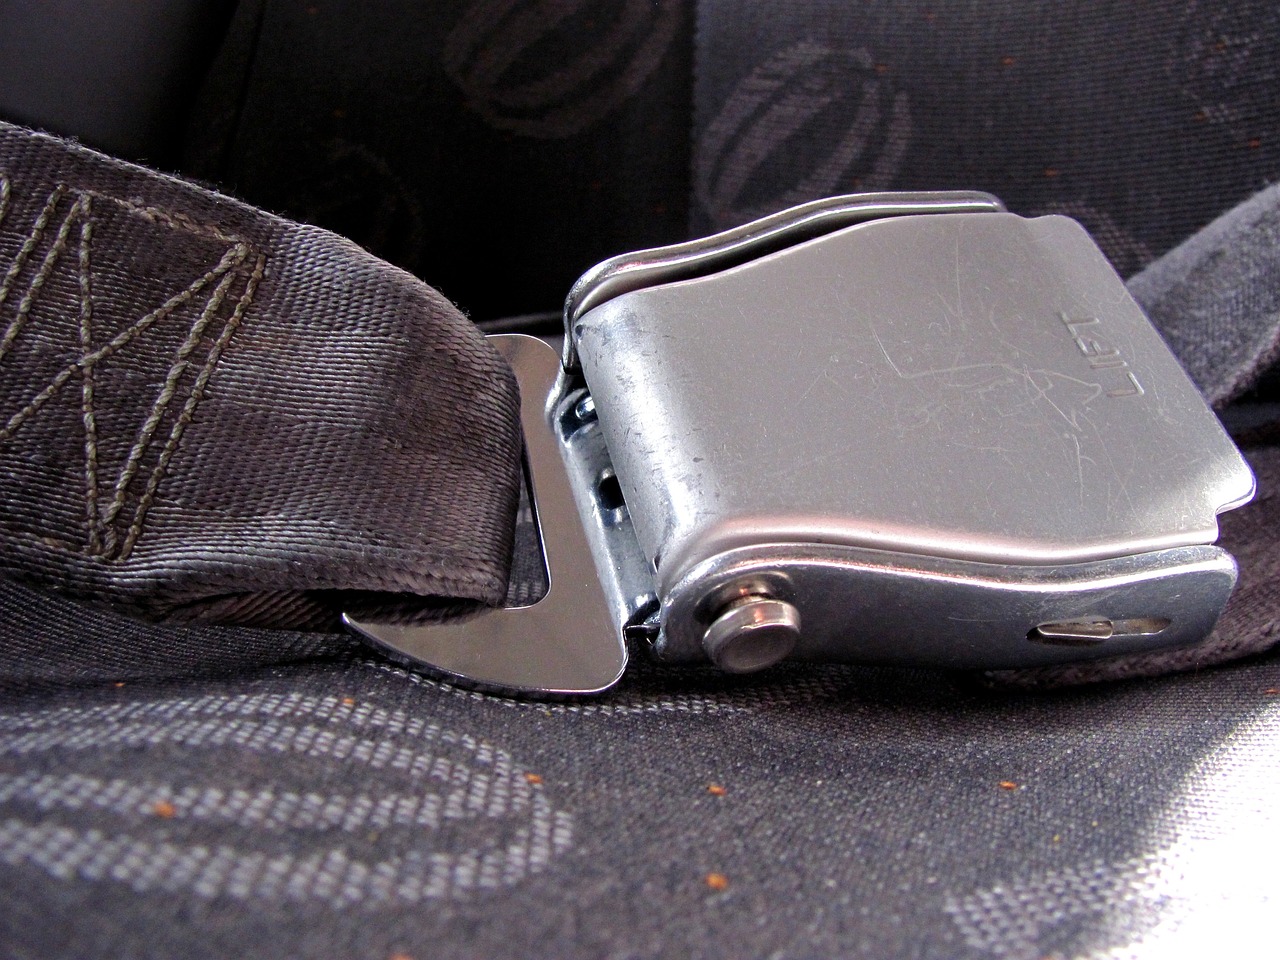 With the “Click It or Ticket” campaign, drivers are reminded to always wear a seat belt